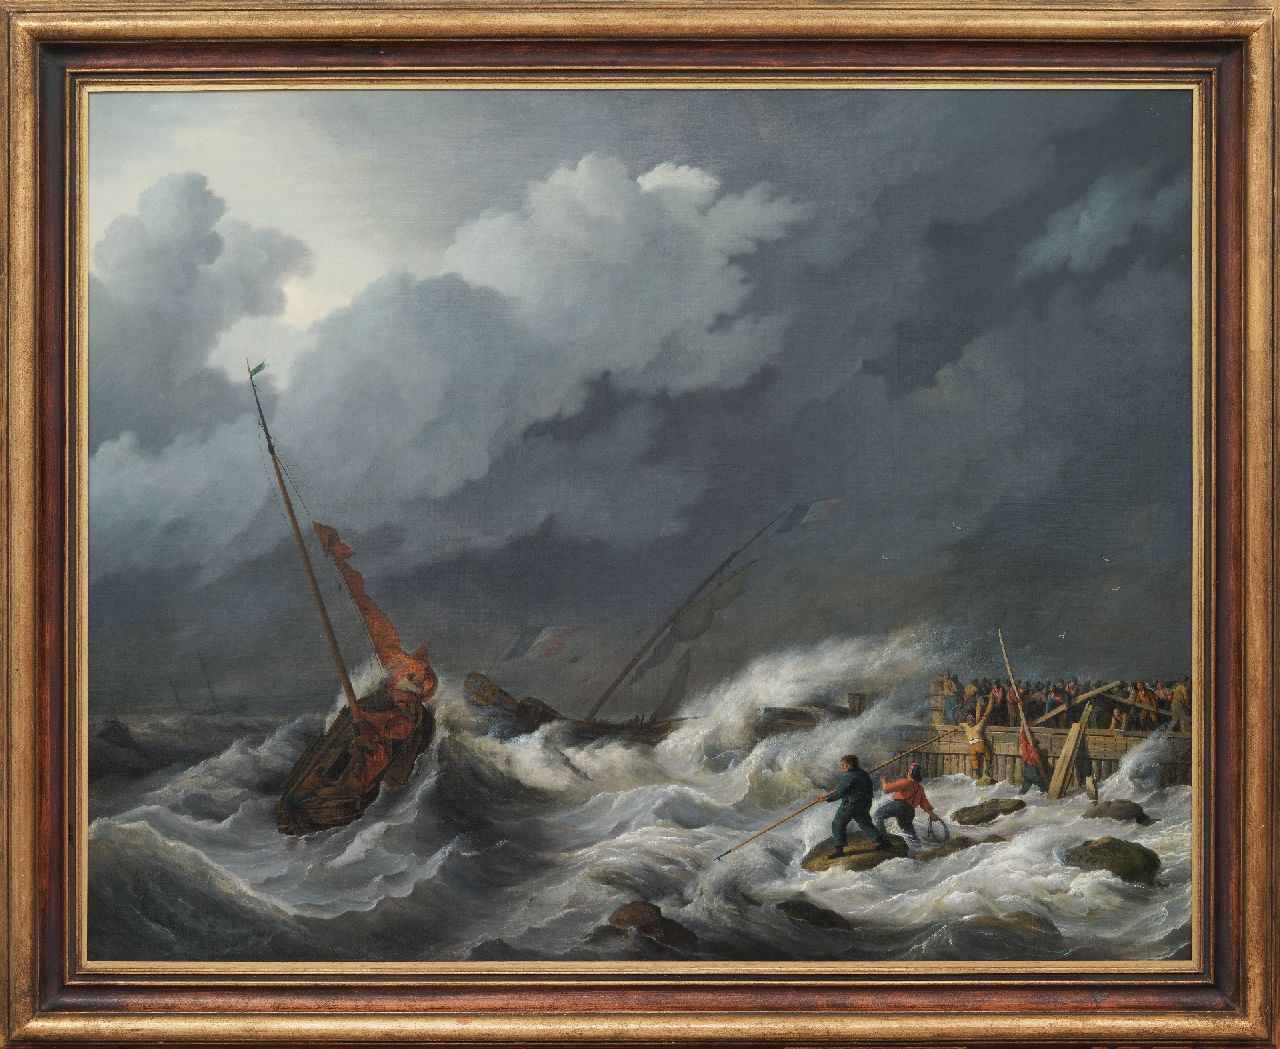 Baur N.  | Nicolaas Baur | Paintings offered for sale | Sailing ships entering a harbout in a heavy storm, oil on canvas 97.2 x 123.3 cm, ca. 1810